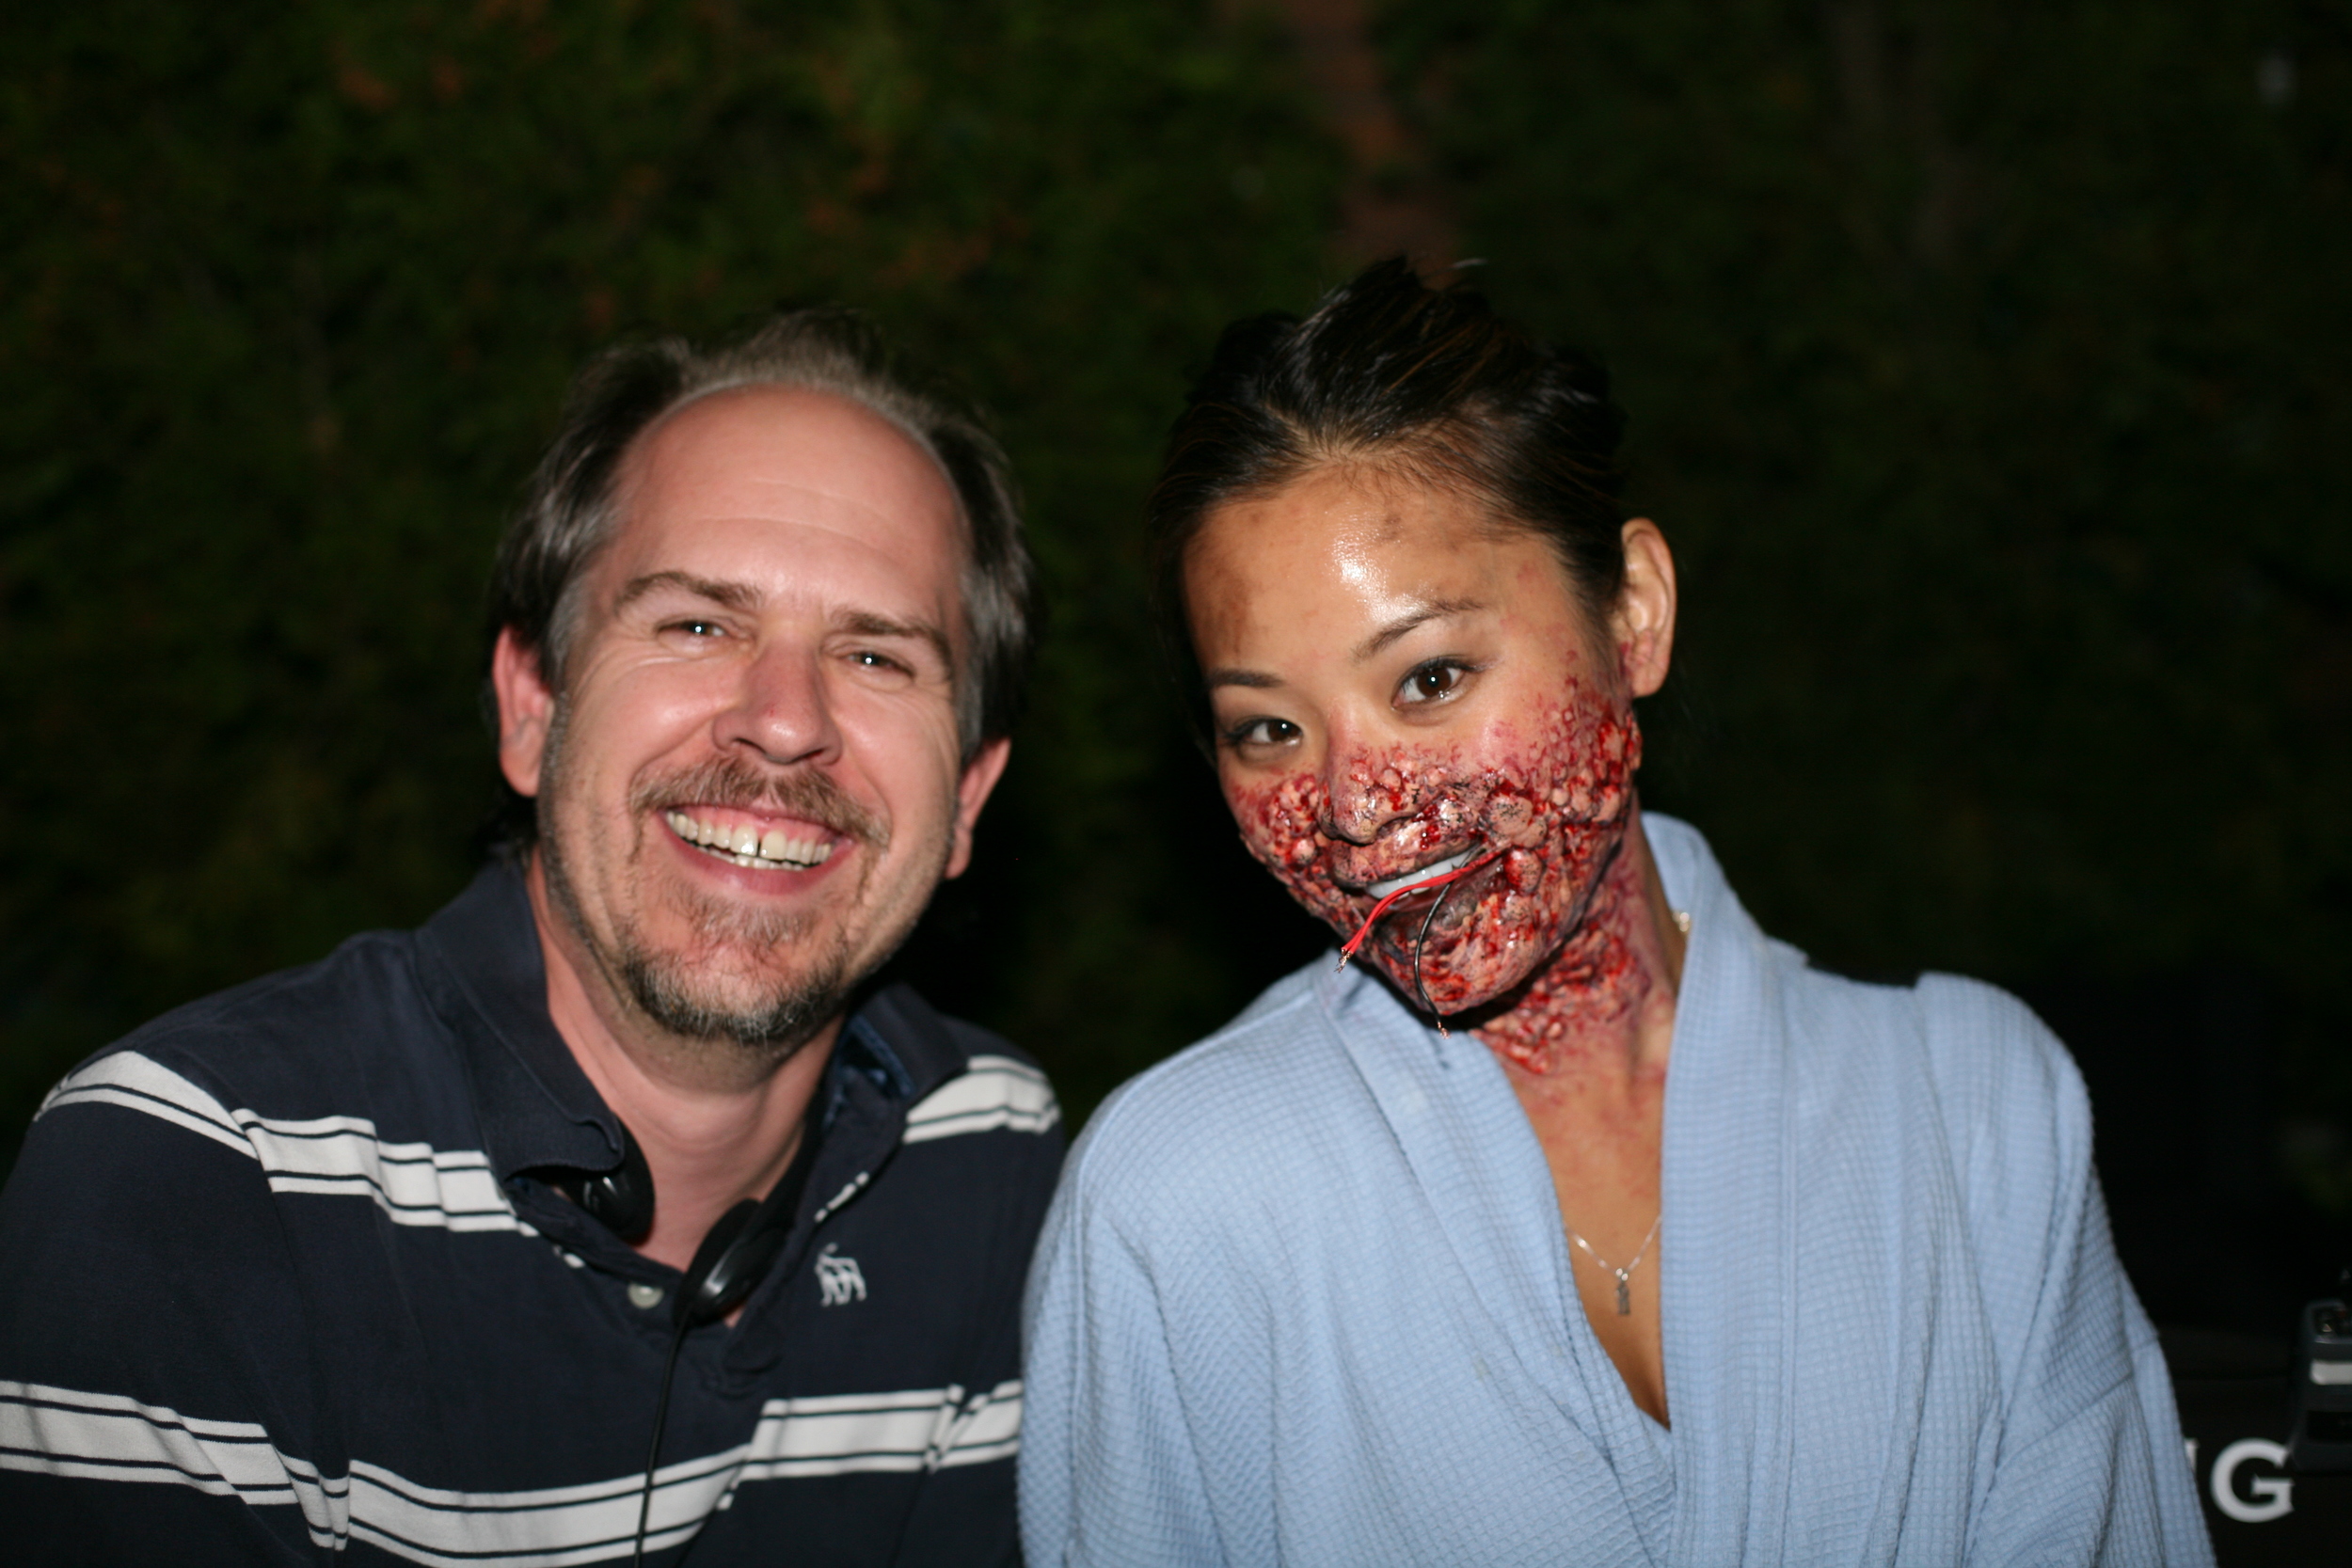 With Jamie Chung in full make-up on Sorority Row